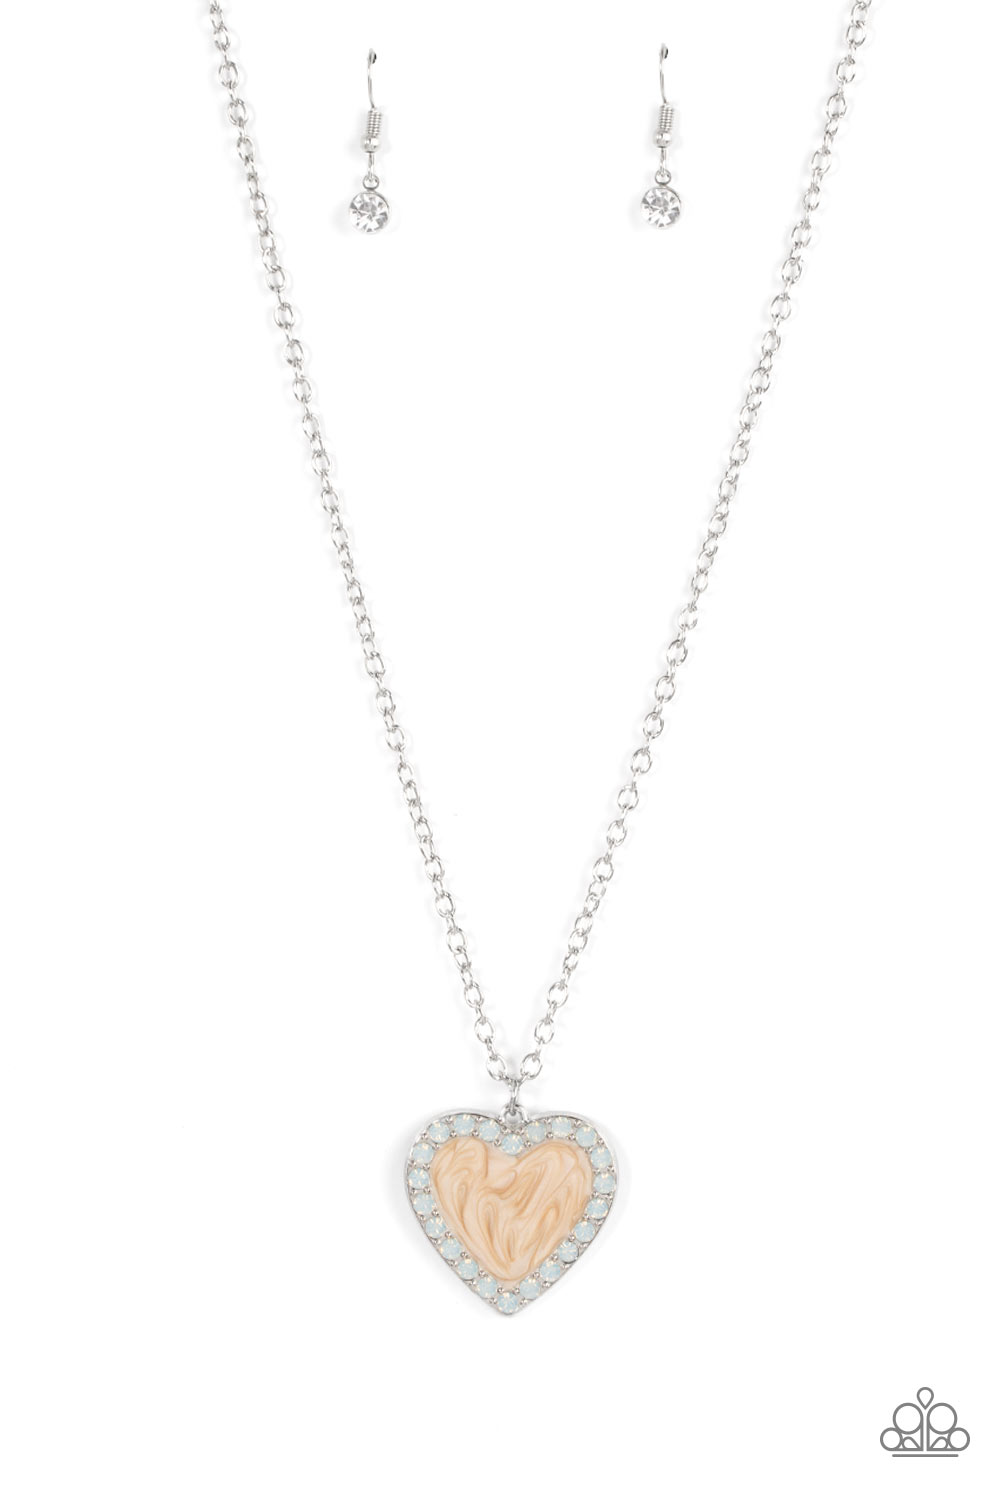 Paparazzi Heart Full of Luster - Brown Necklace